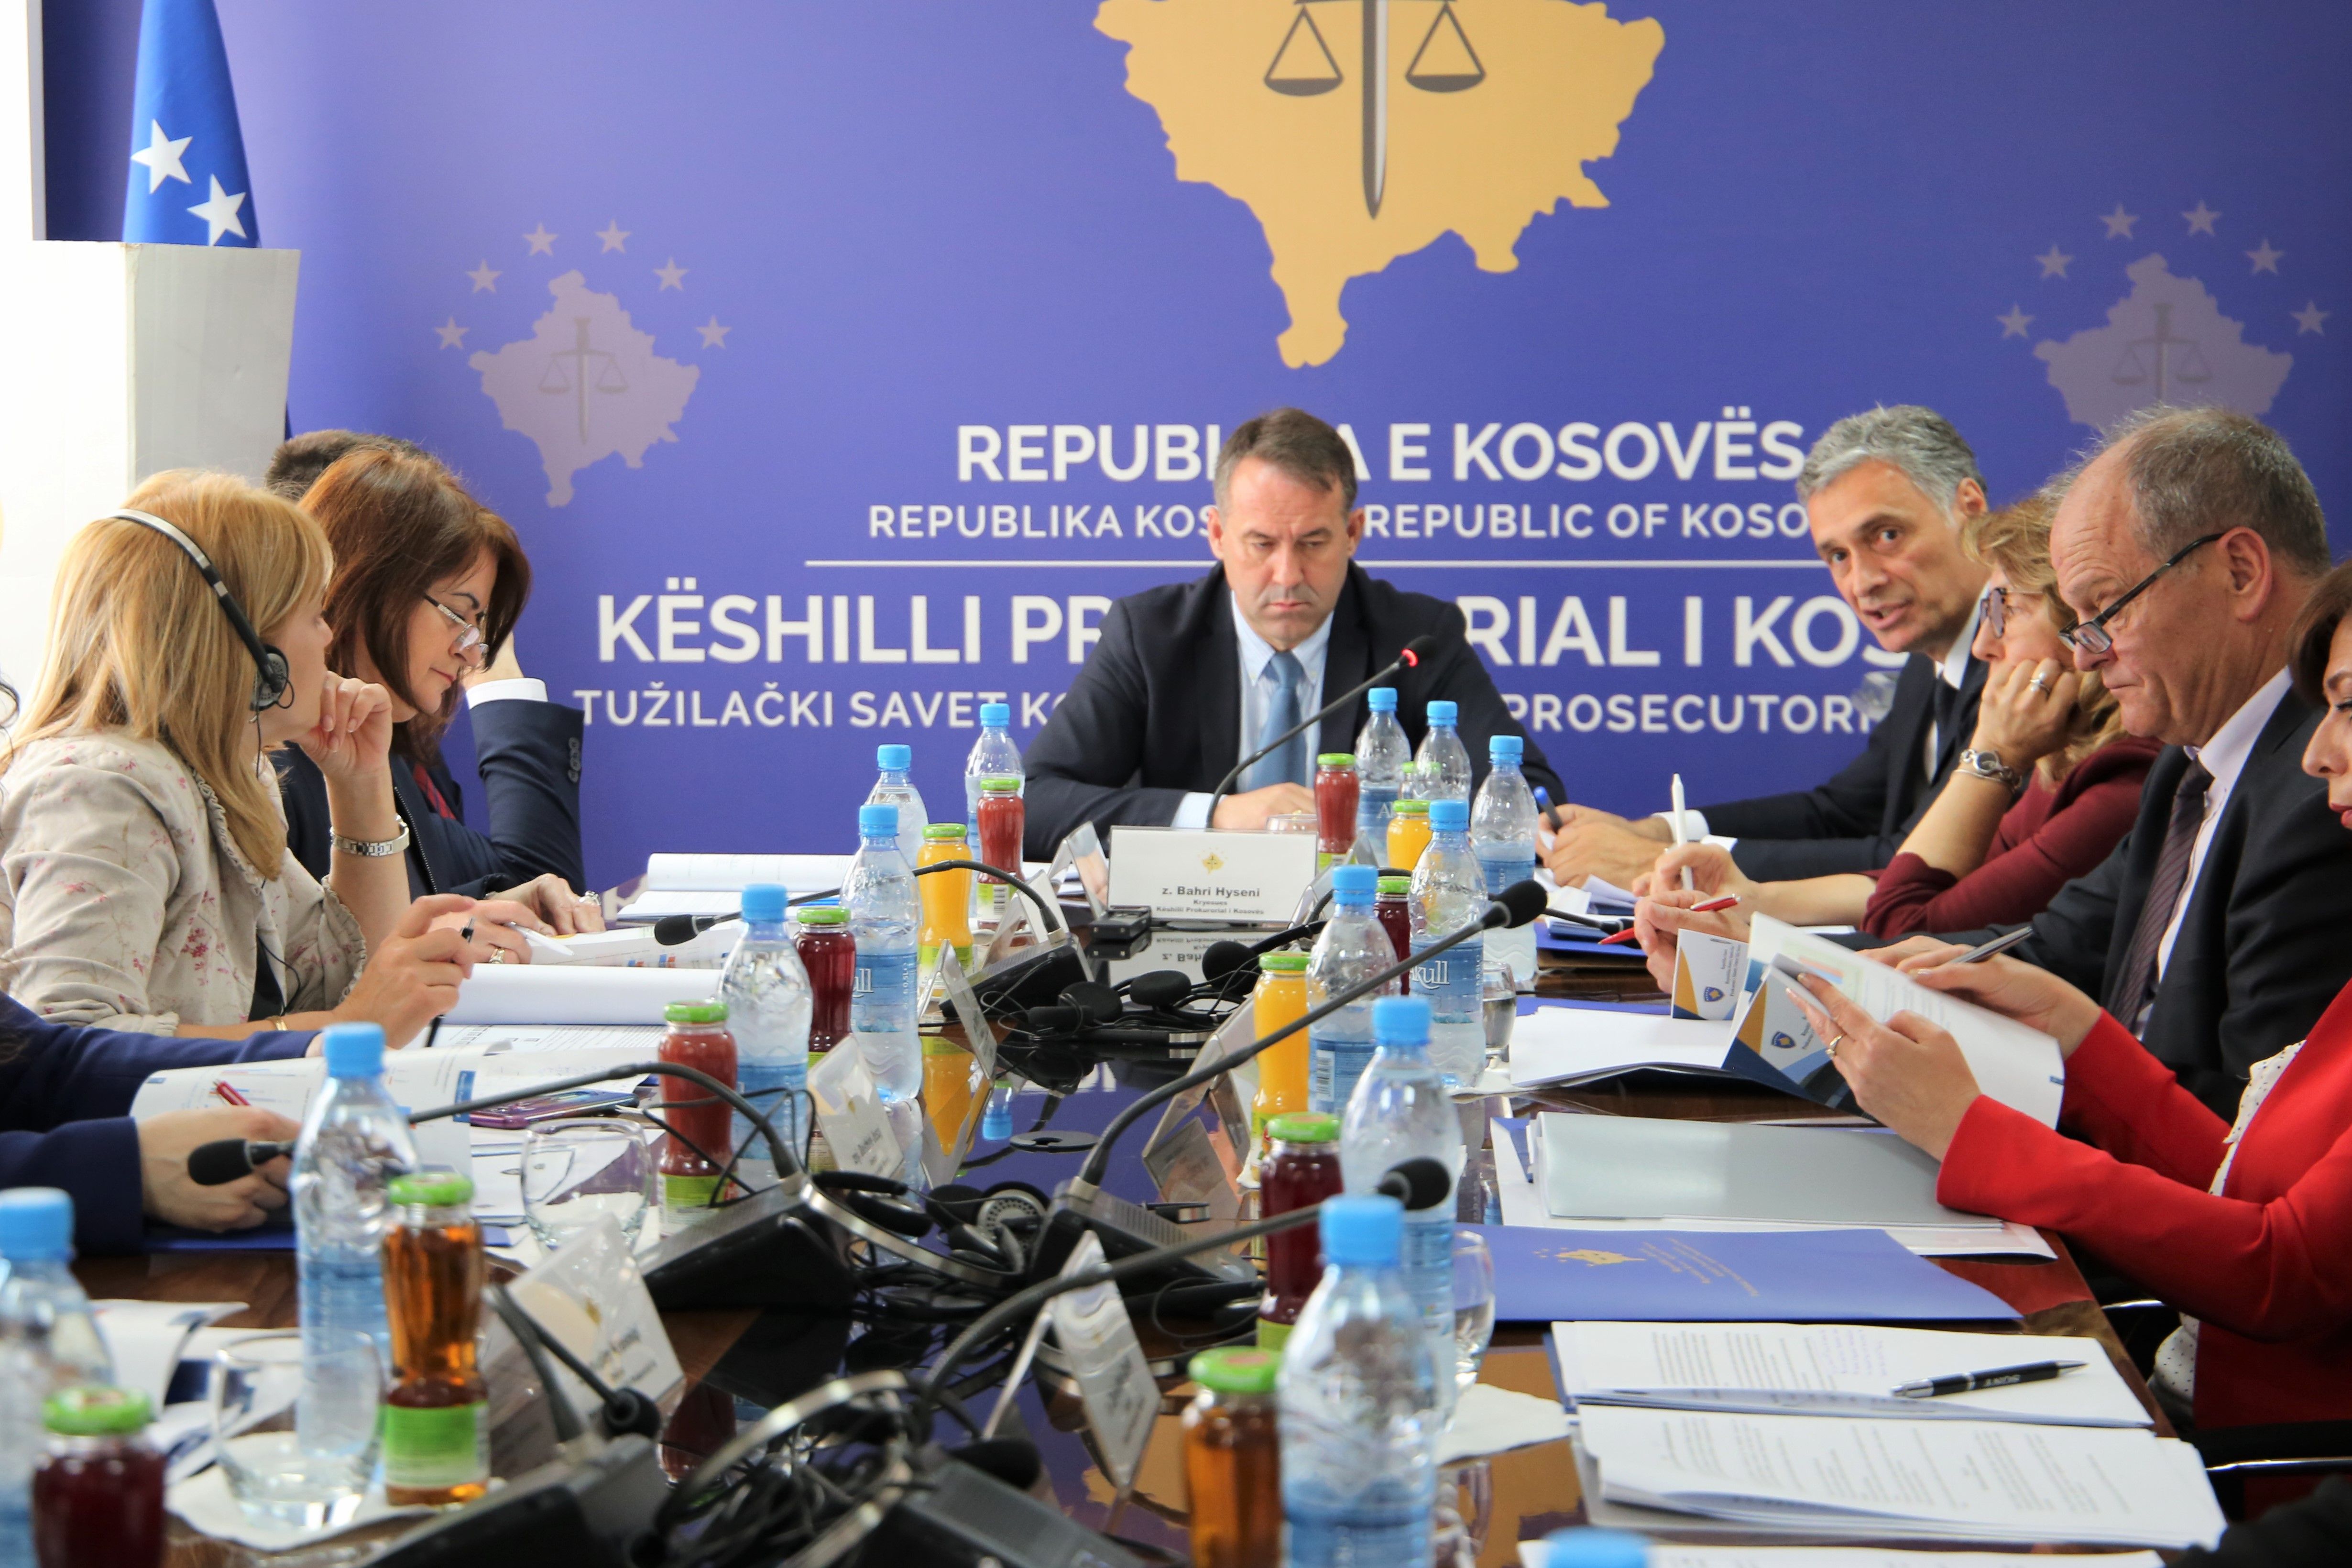 74 thousand of 31 criminal case files completed by the State Prosecutor